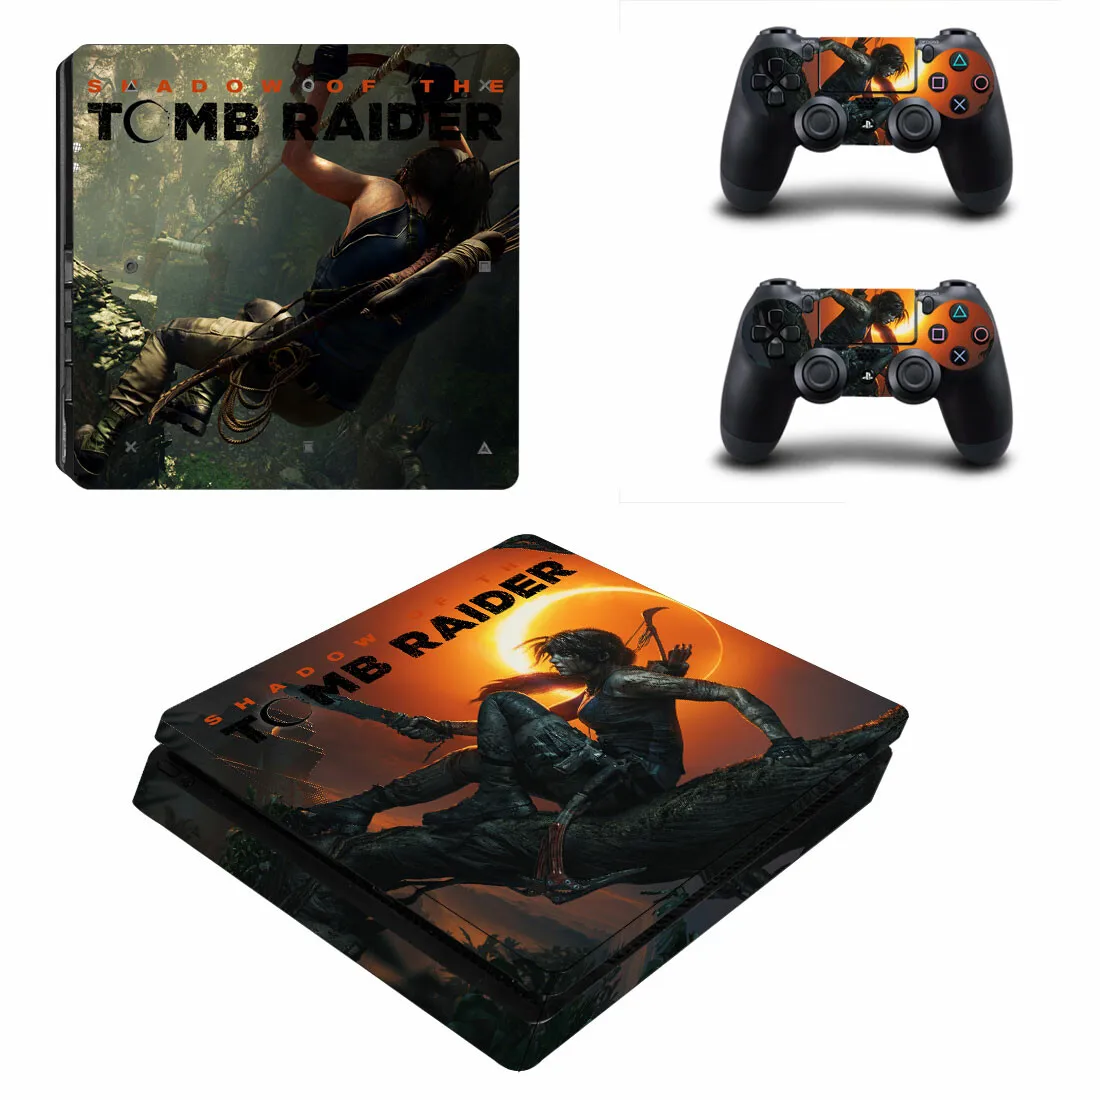 

Tomb Raider PS4 Slim Skin Sticker For Sony PlayStation 4 Console and Controllers PS4 Slim Skins Sticker Decal Vinyl